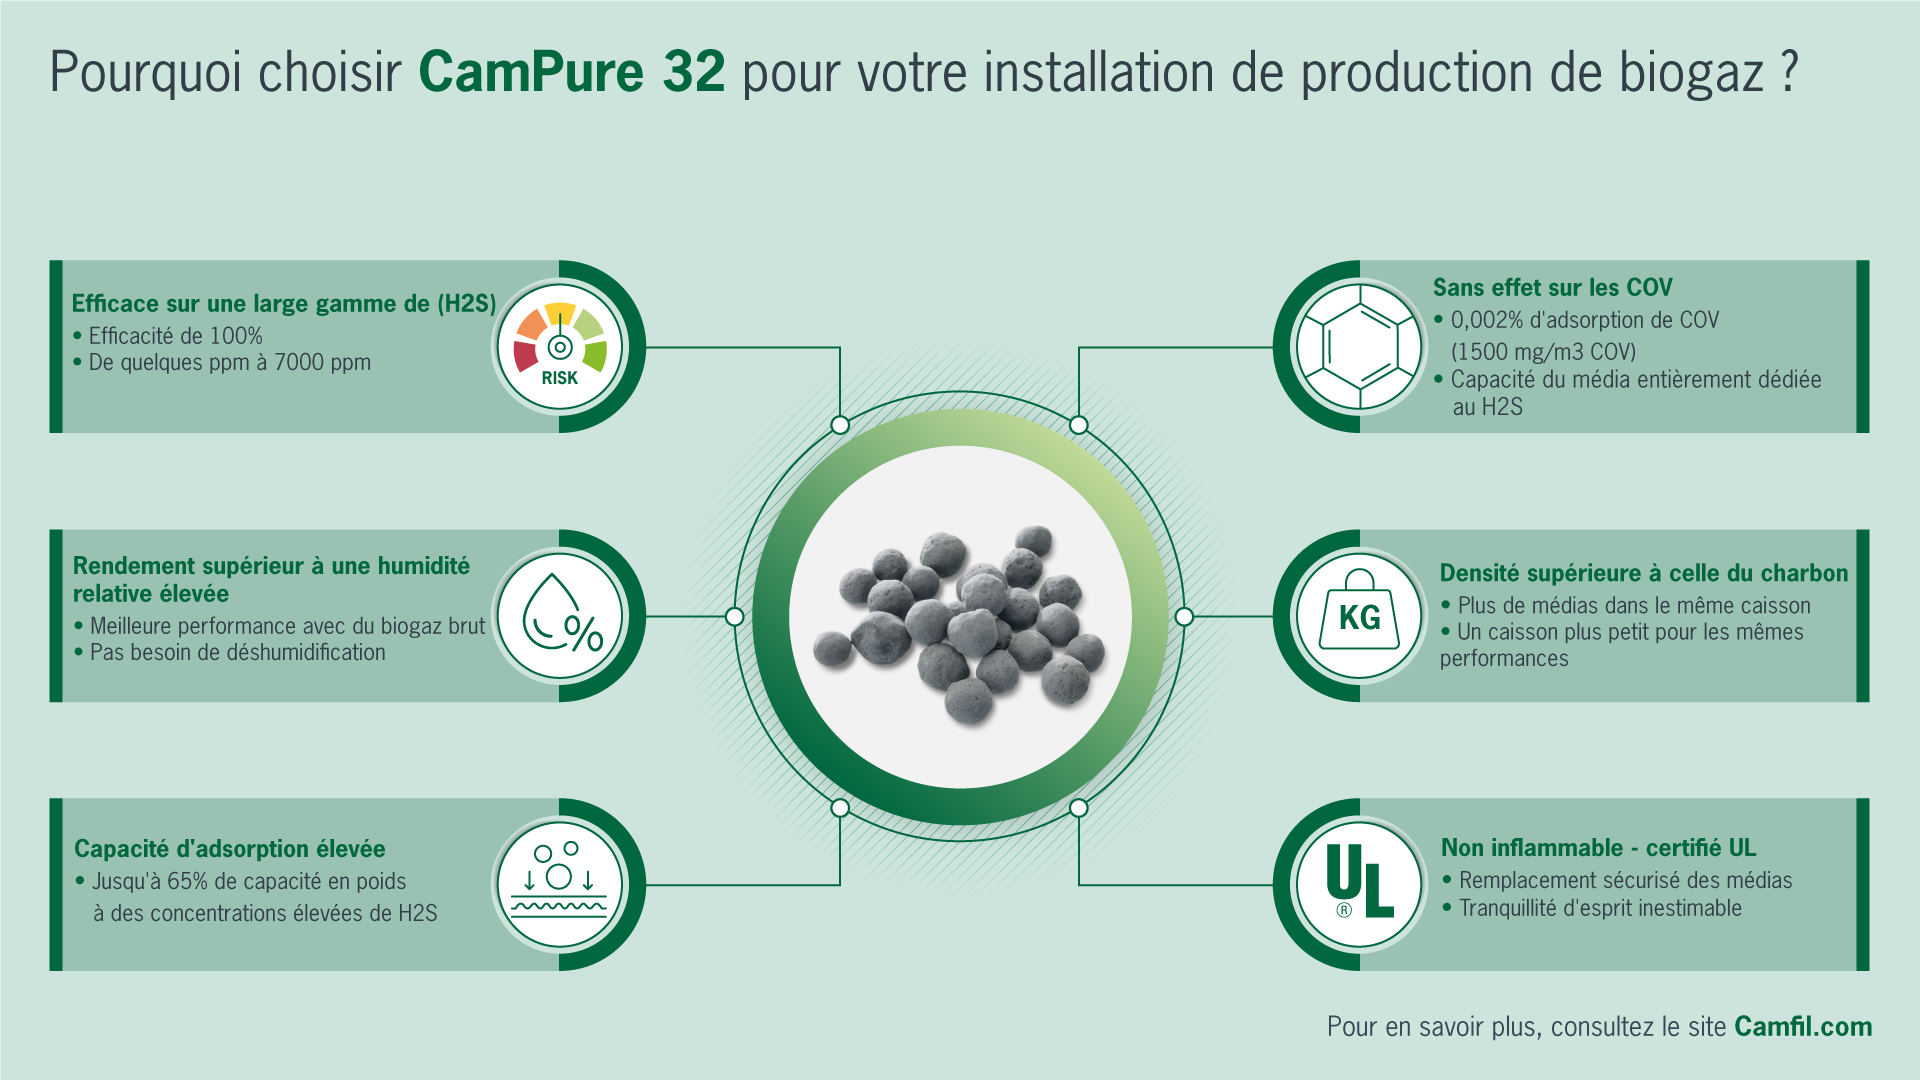 Campure 32 infographic french